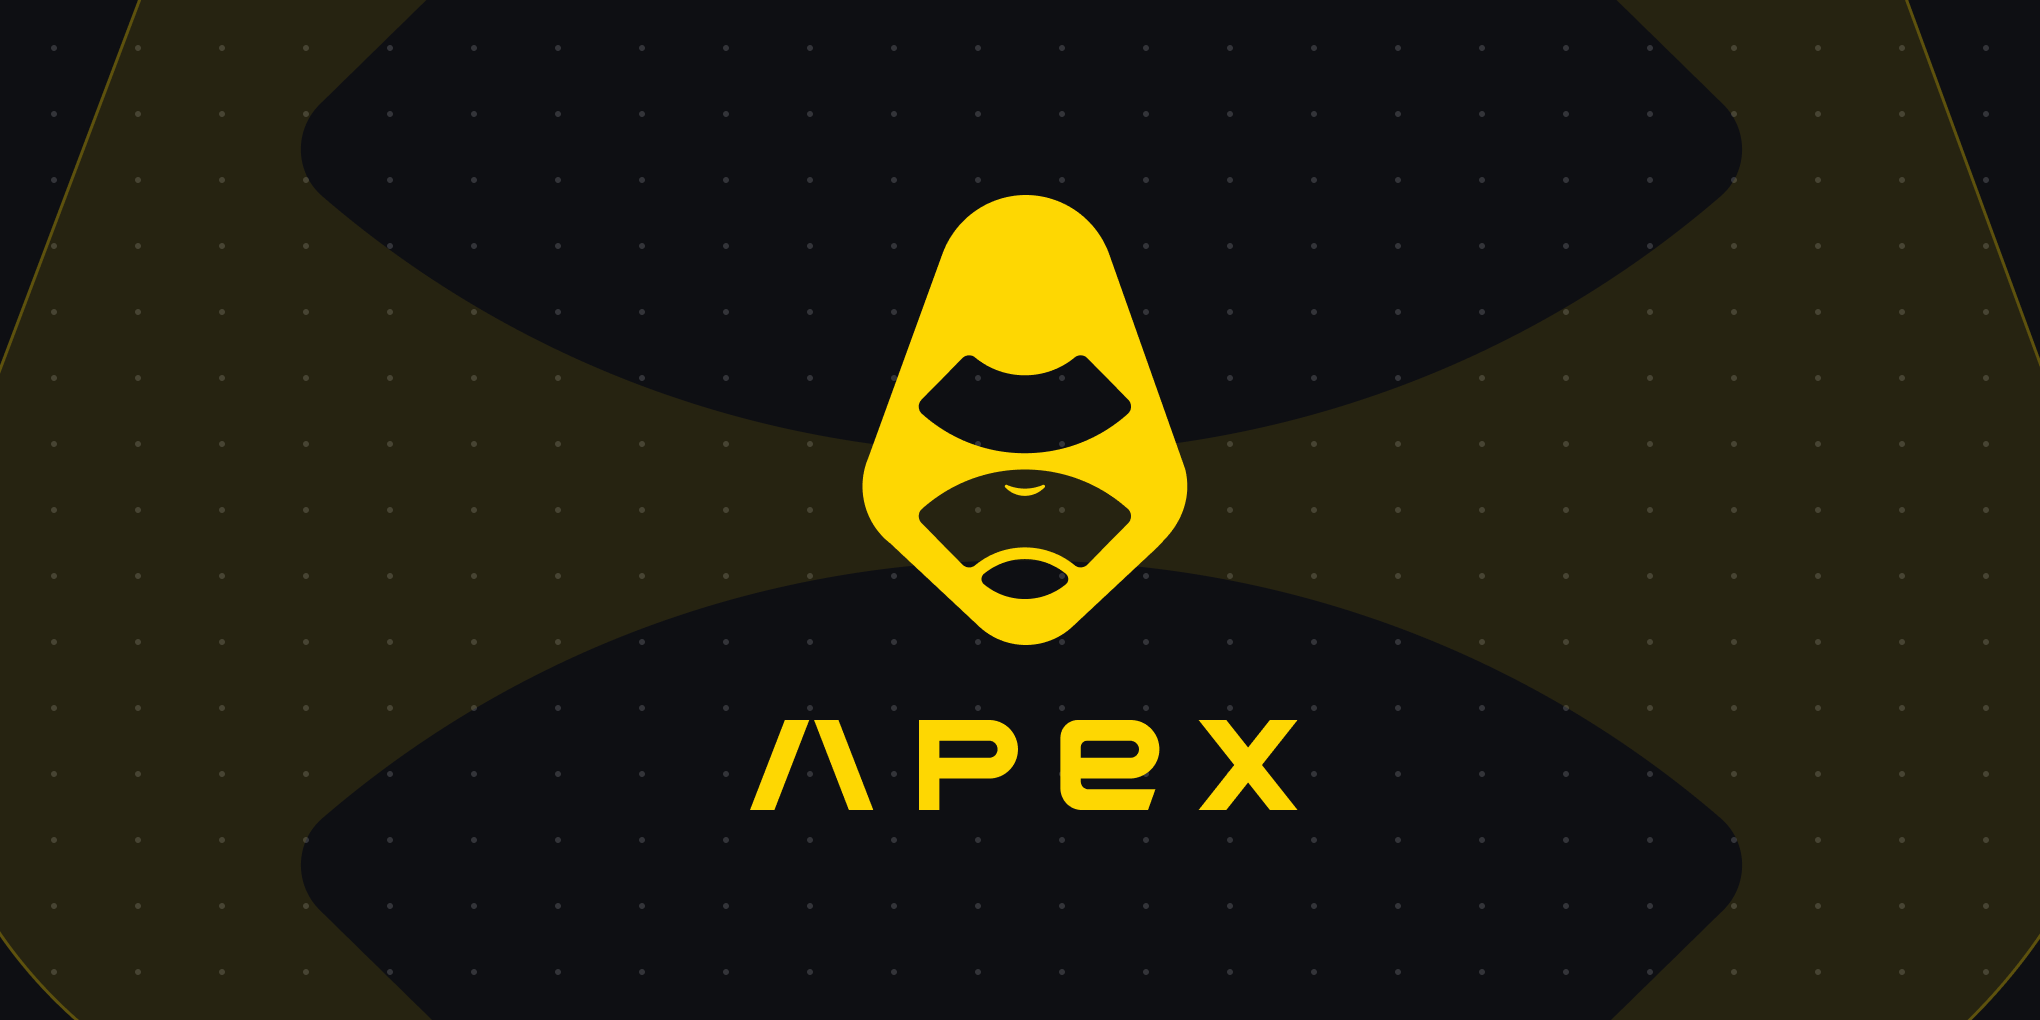 <a href="https://pro.apex.exchange/trade/BTC-USDC?affiliate_id=357&group_id=998&group_type=1&utm_campaign=AFF_RU_LEARN_apex_signup">https://apex.exchange.io</a>